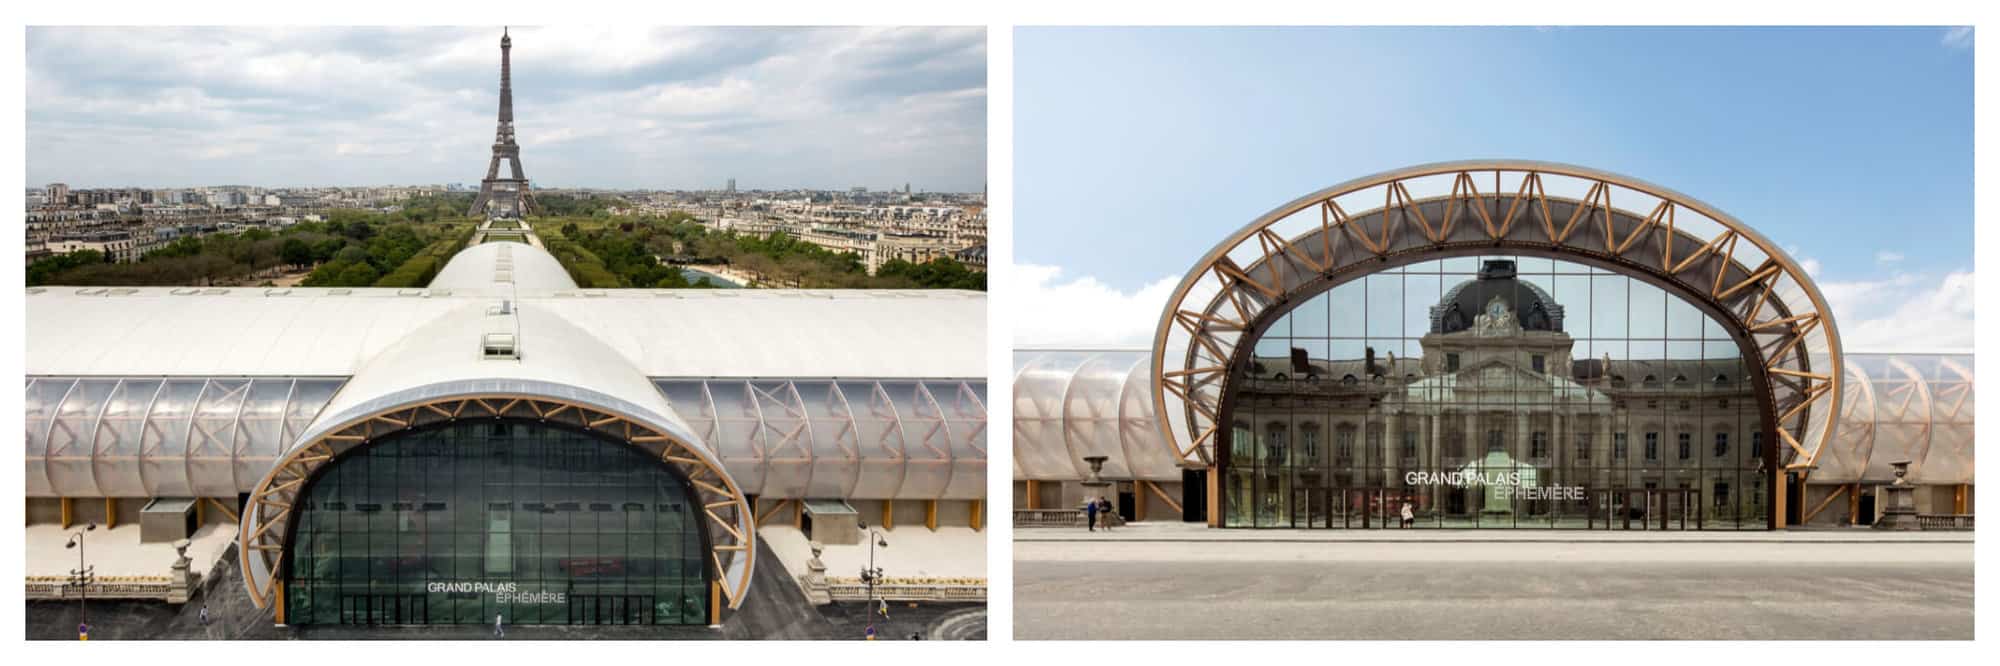 Left: the exterior of Le Grand Palais Ephemere with the Eiffel Tower in the background. Right: another exterior shot of Le Grand Palais Ephemere. 